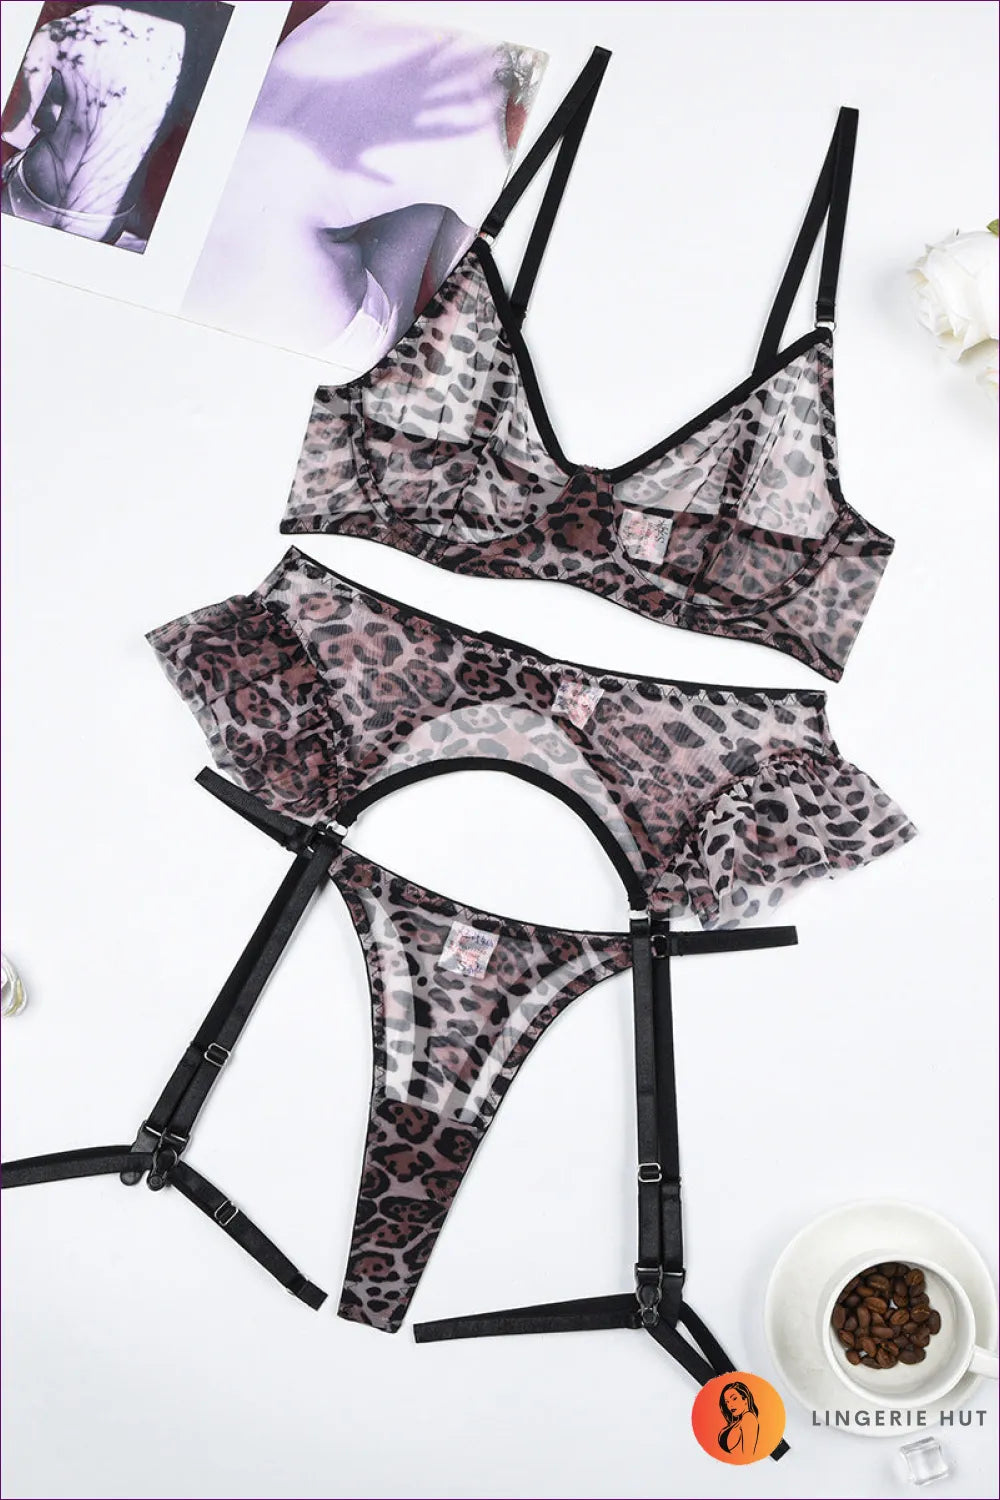 Indulge In The Allure Of Wild With Lingerie Hut’s Leopard Luxe Four-piece Set - a Perfect Blend Leopard Print